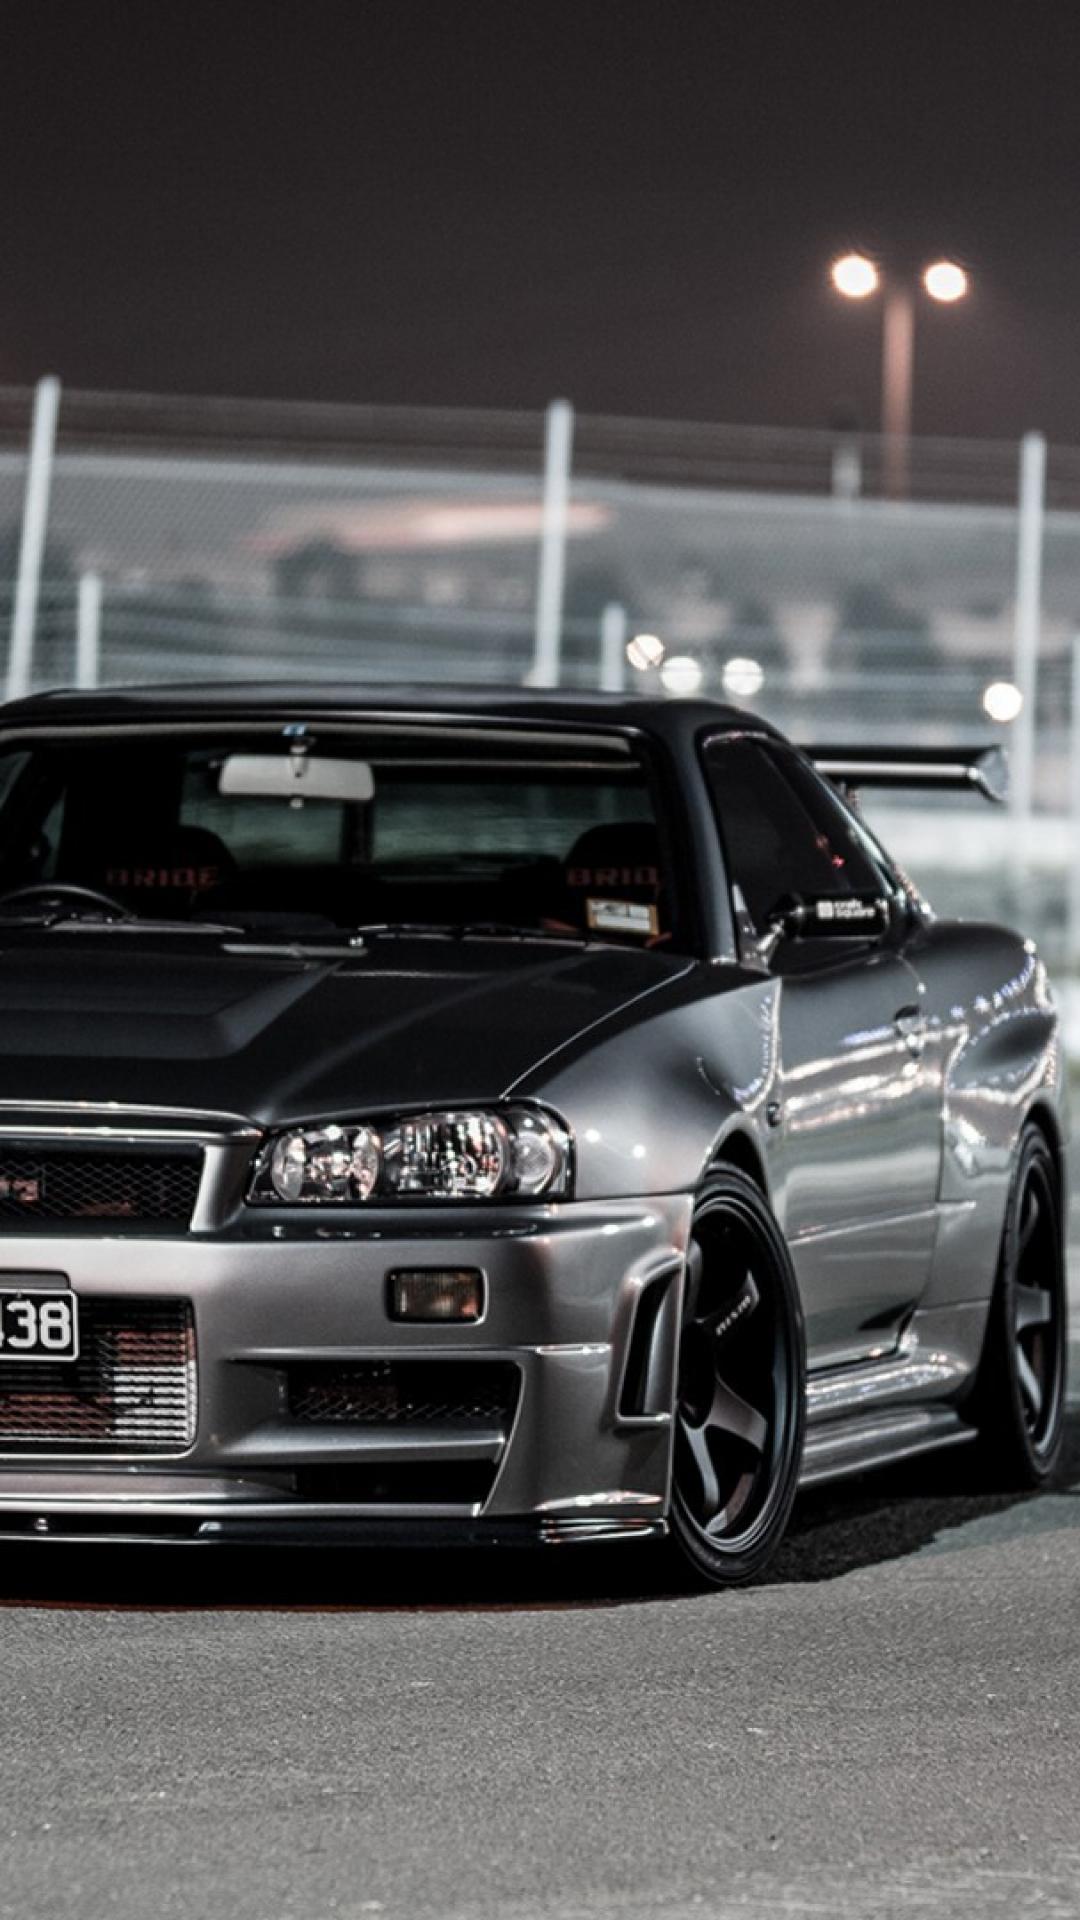 Nissan GT-R | iPhone Wallpapers